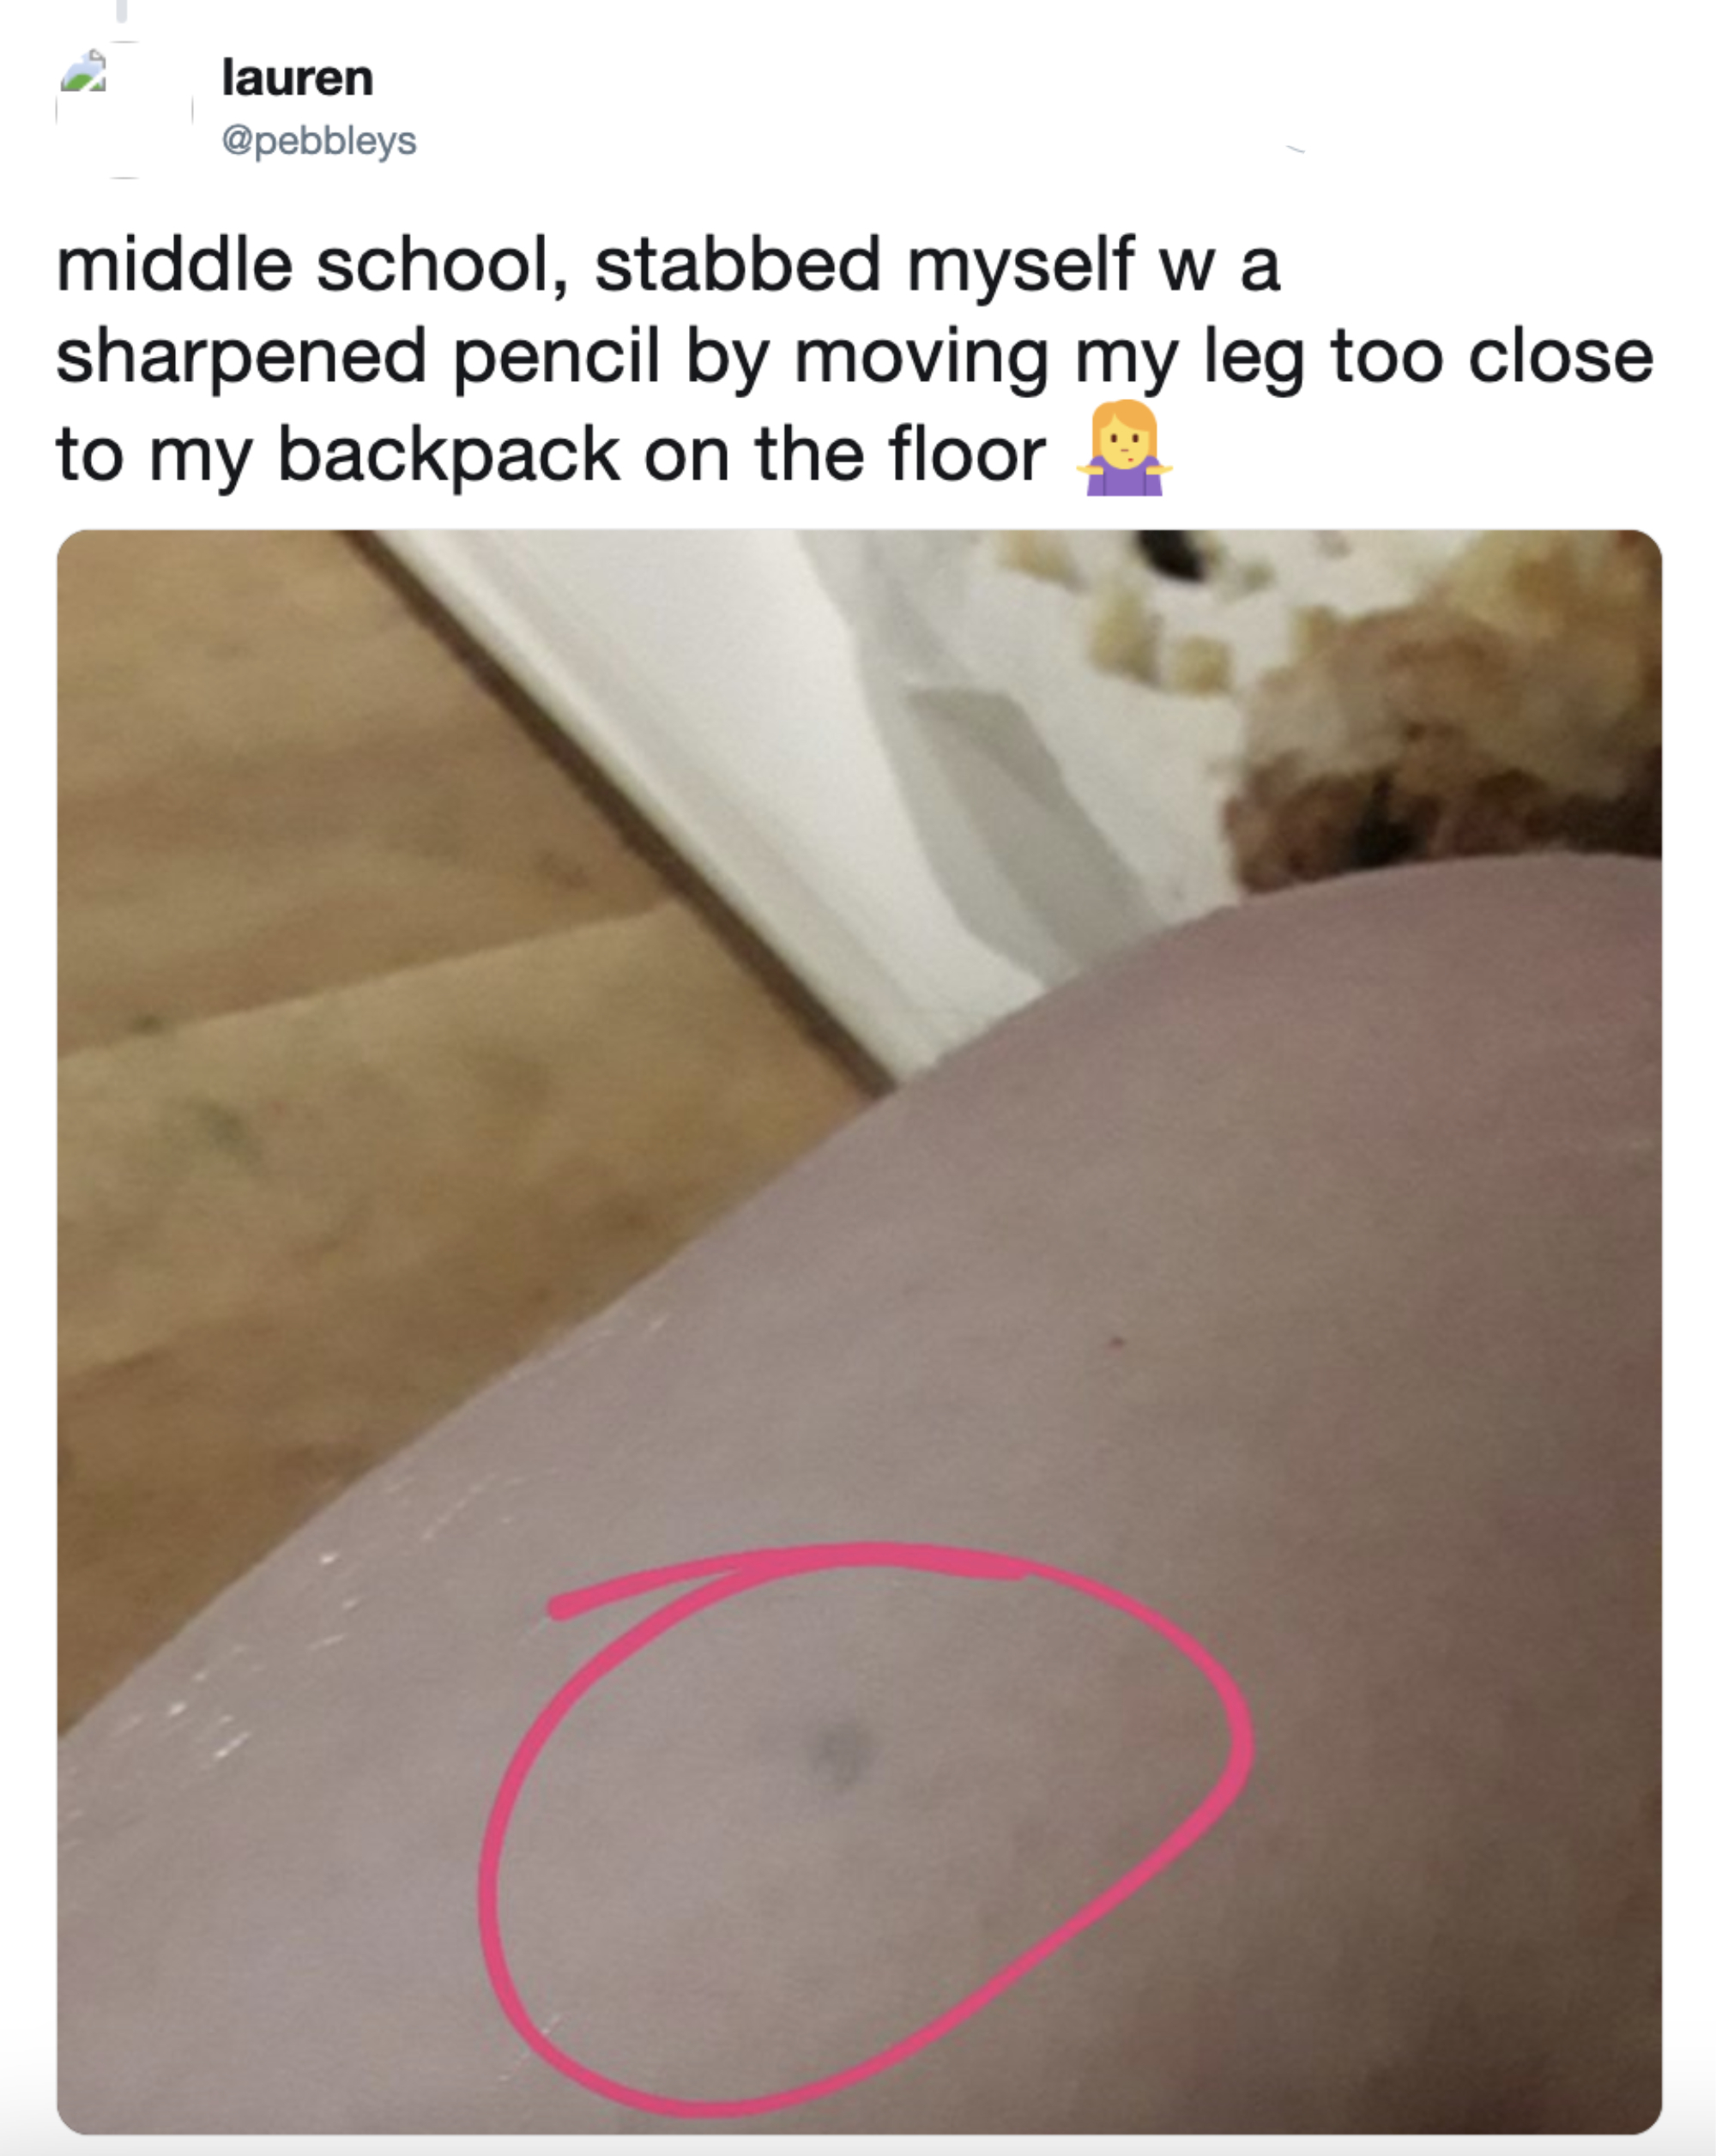 Person&#x27;s knee with a small mark circled in pink, likely indicating a minor injury. A tweet overlay describes a stubbing incident